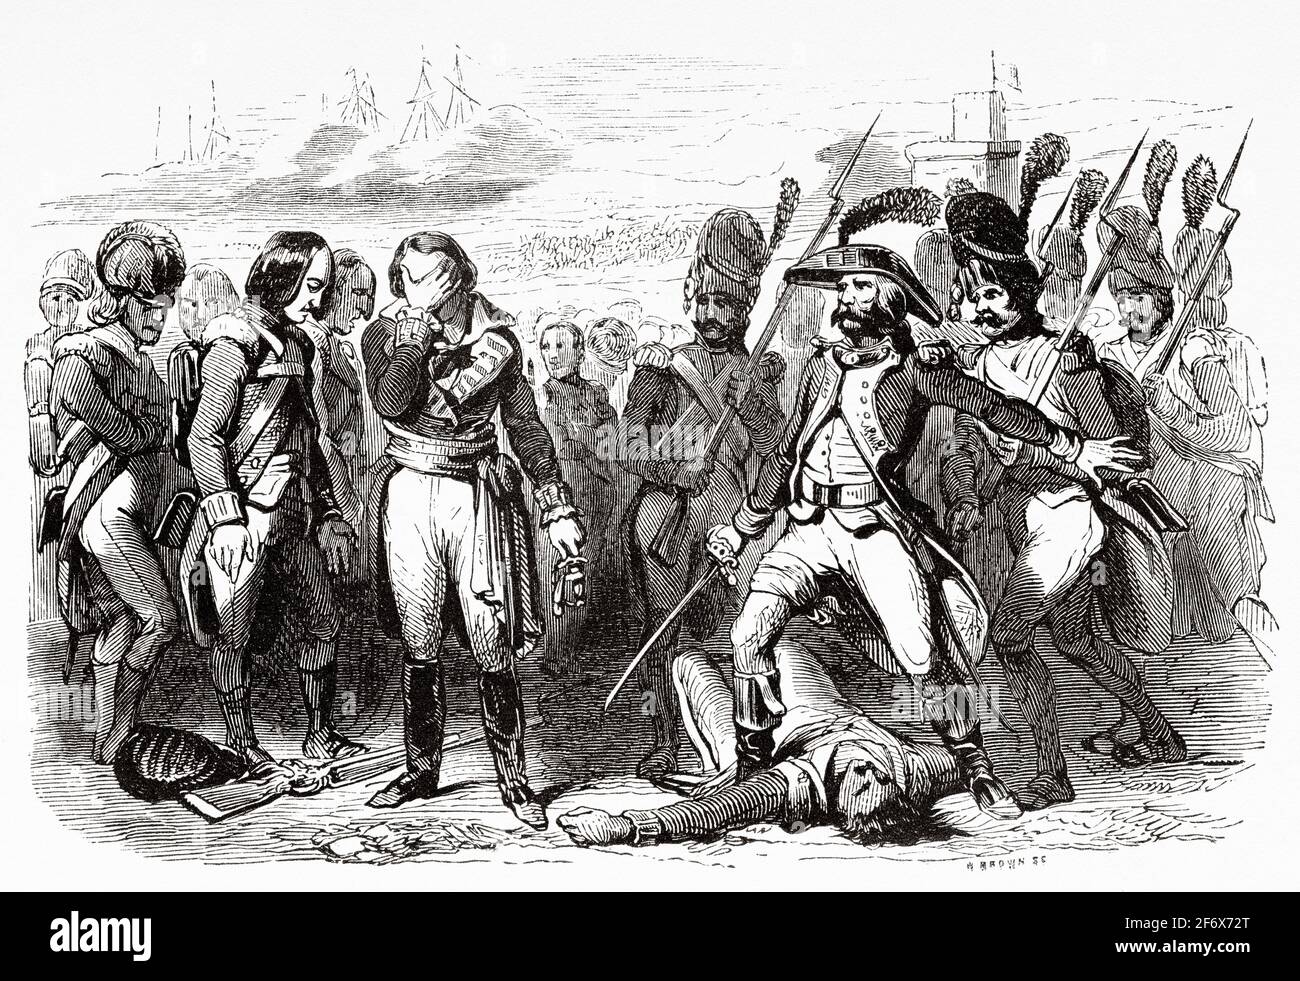 The invasion of France in 1795. The Battle of Quiberon was a major landing on the Quiberon peninsula by counter-revolutionary troops in support of the Chouannerie and Vendée Revolt. France, French Revolution 18th century. Old engraved illustration from Histoire de la Revolution Francaise 1845 Stock Photo